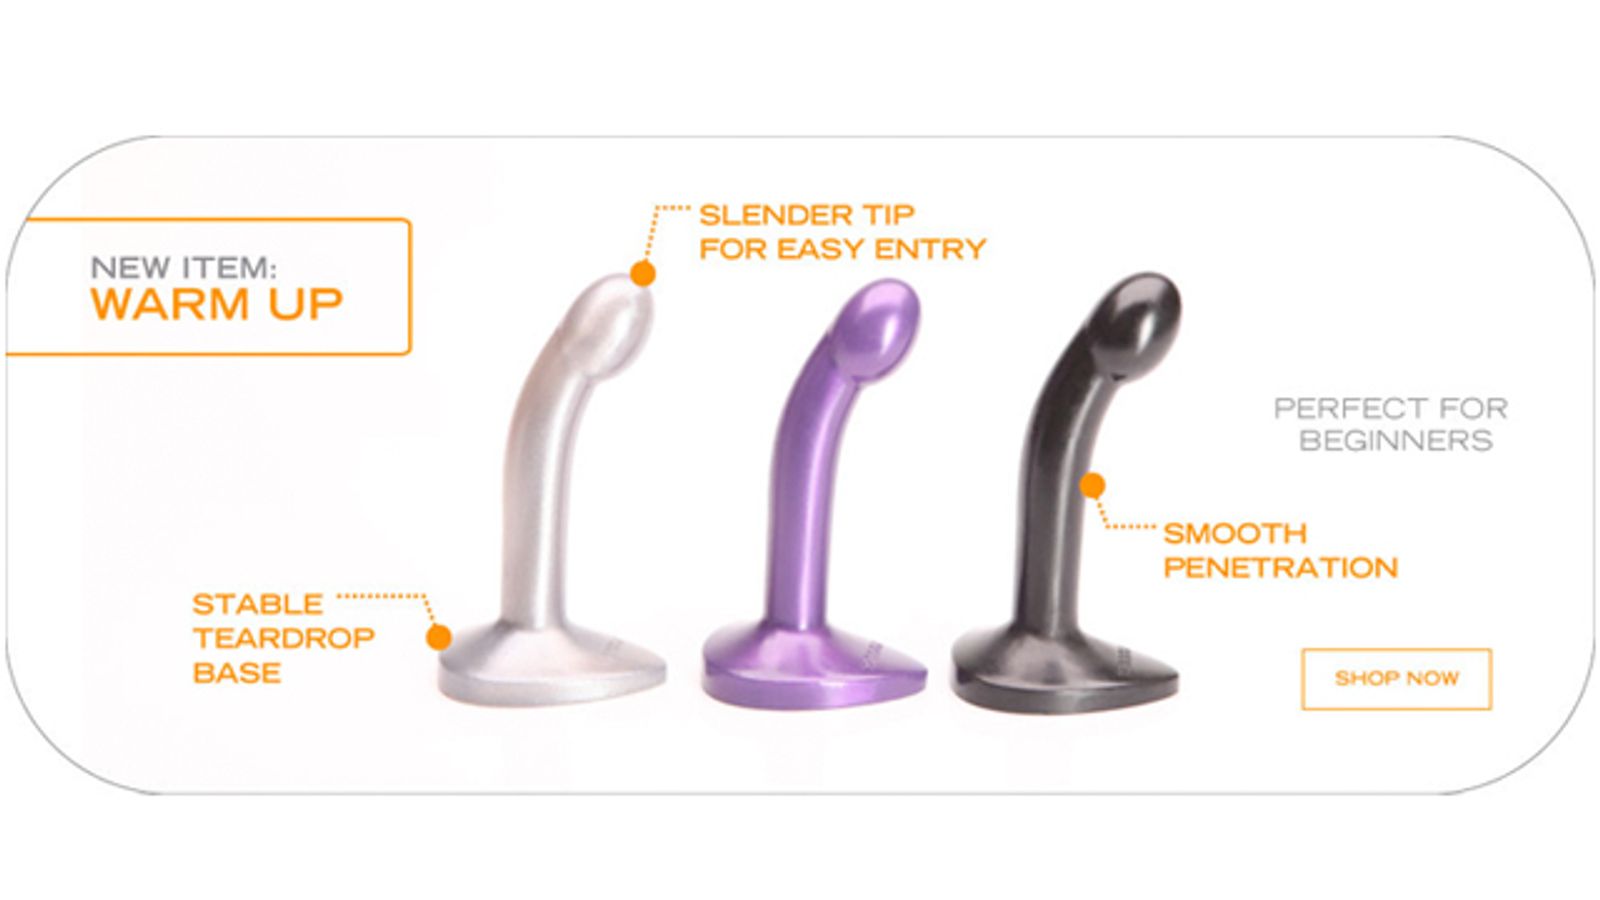 Tantus Debuts Newest Item: The Warm Up